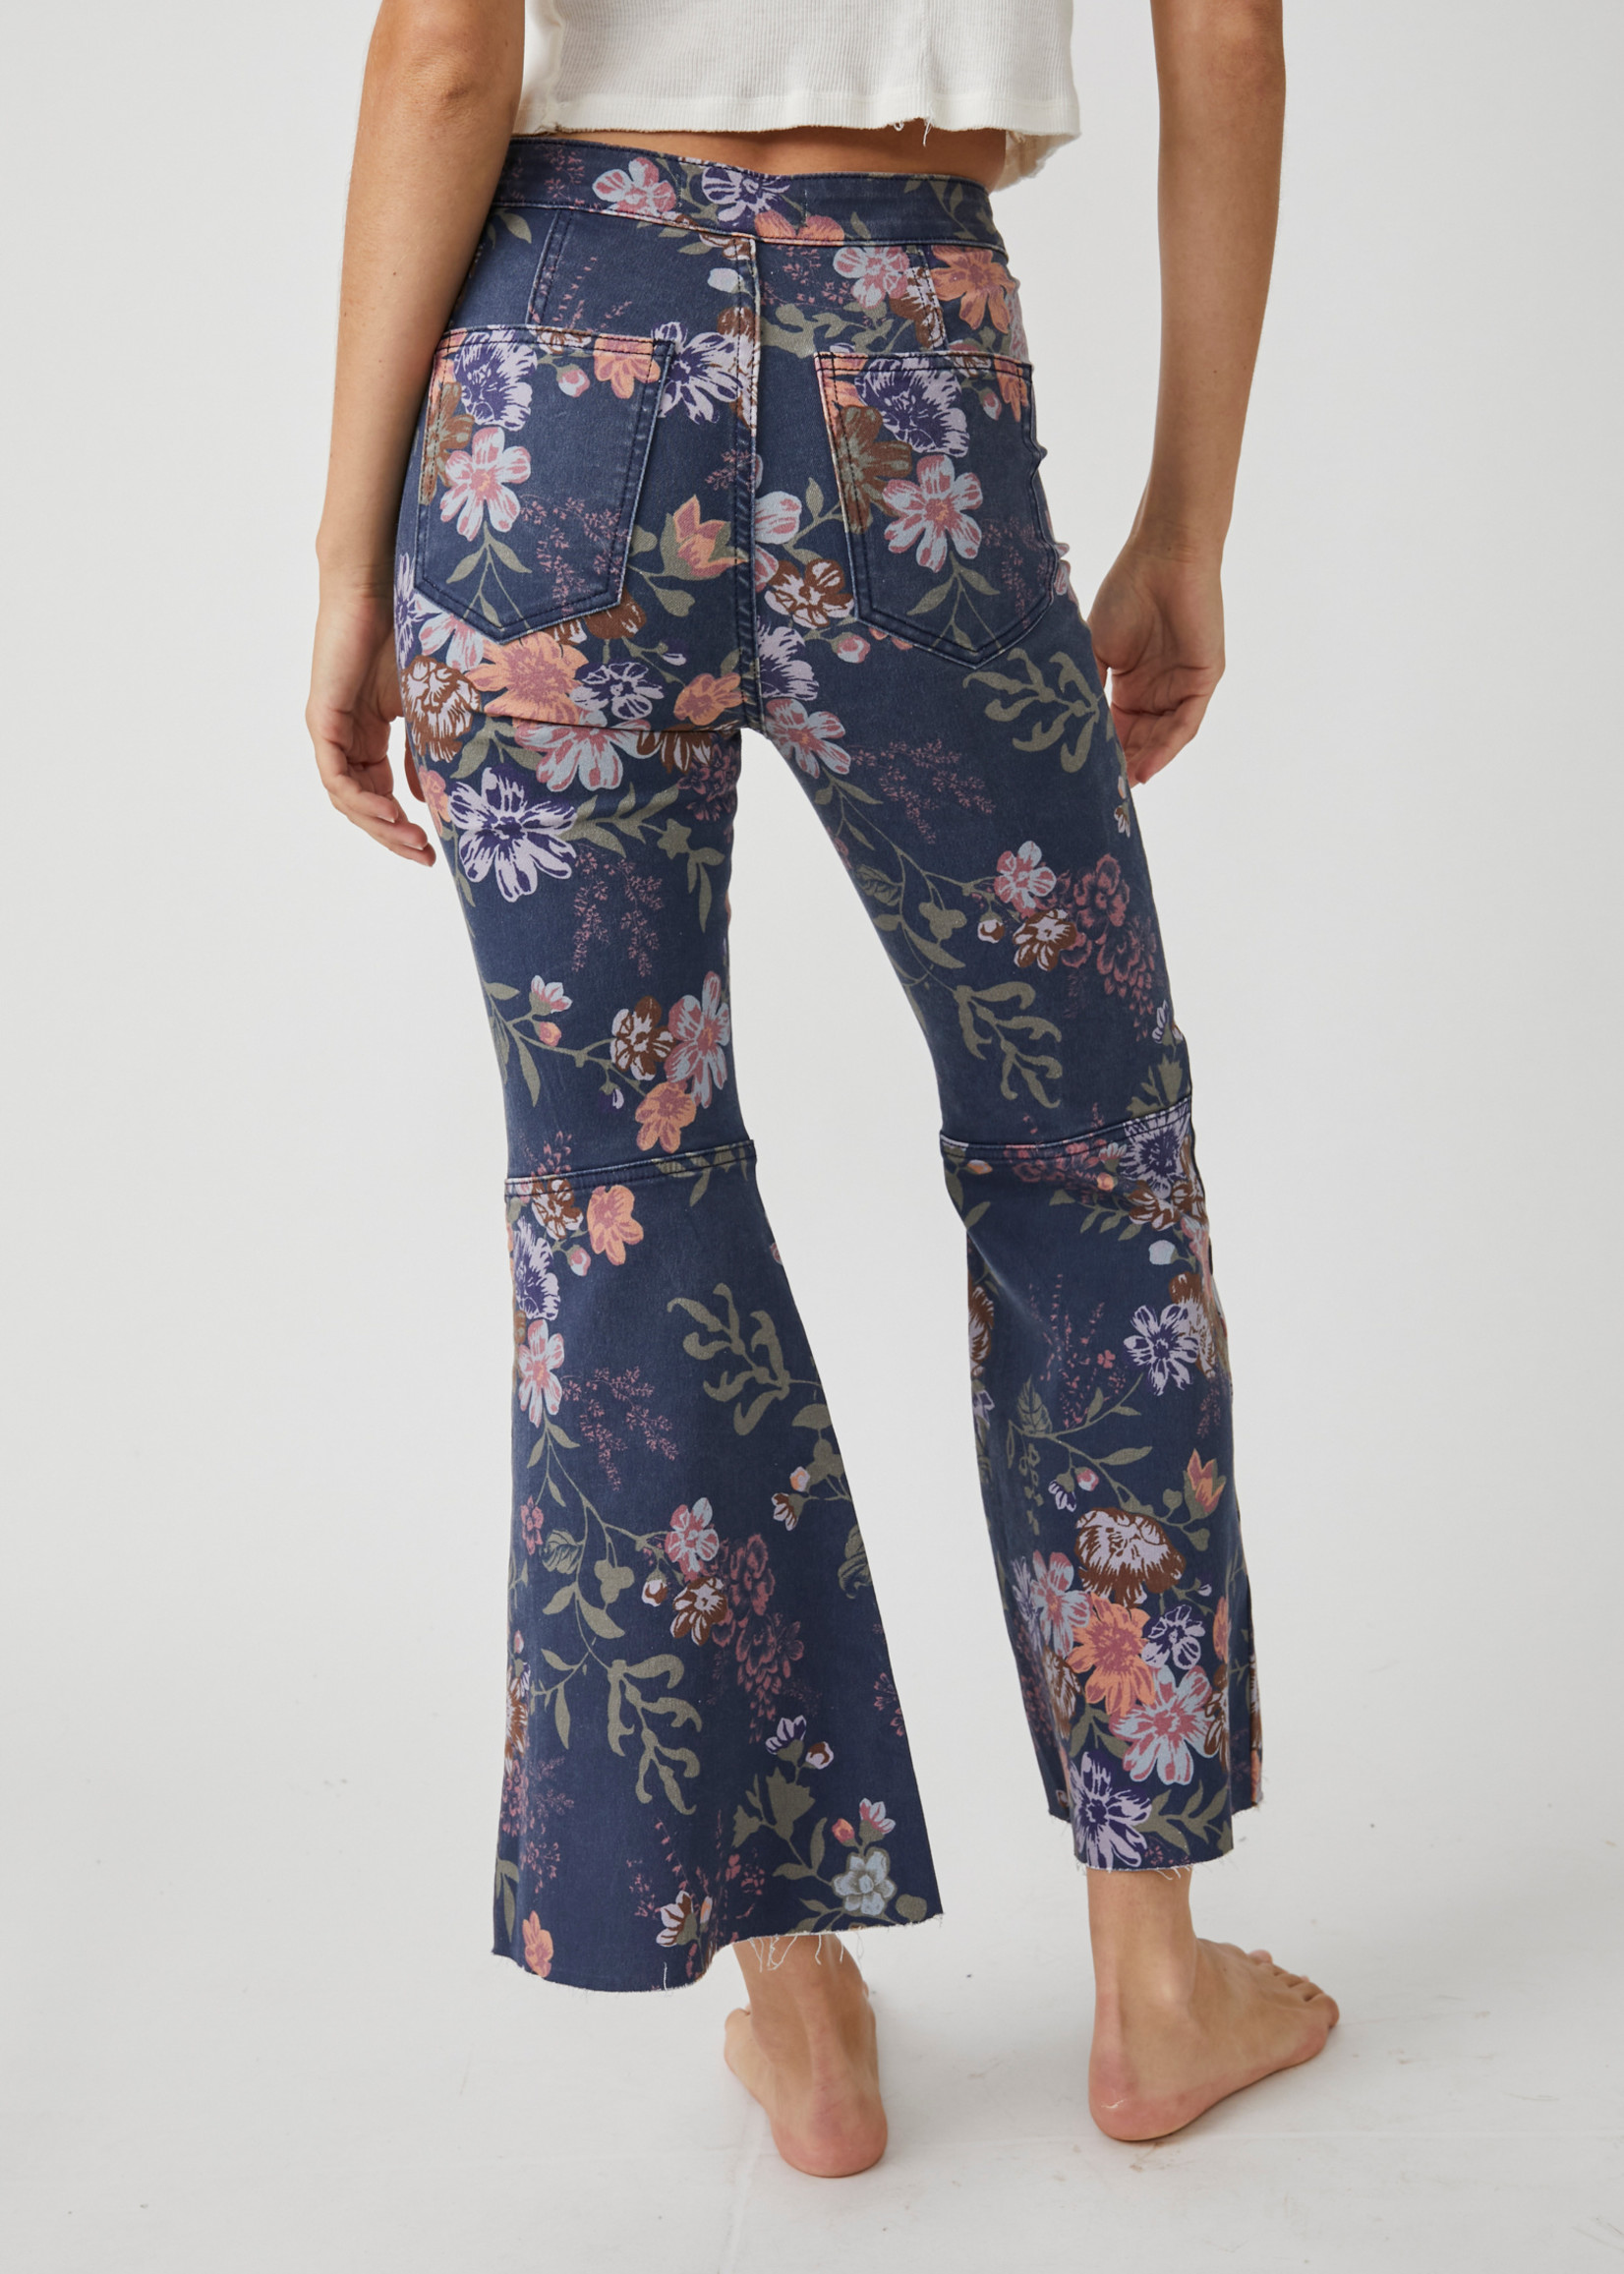 Free People Free People Youthquake Printed Crop Flare Jeans